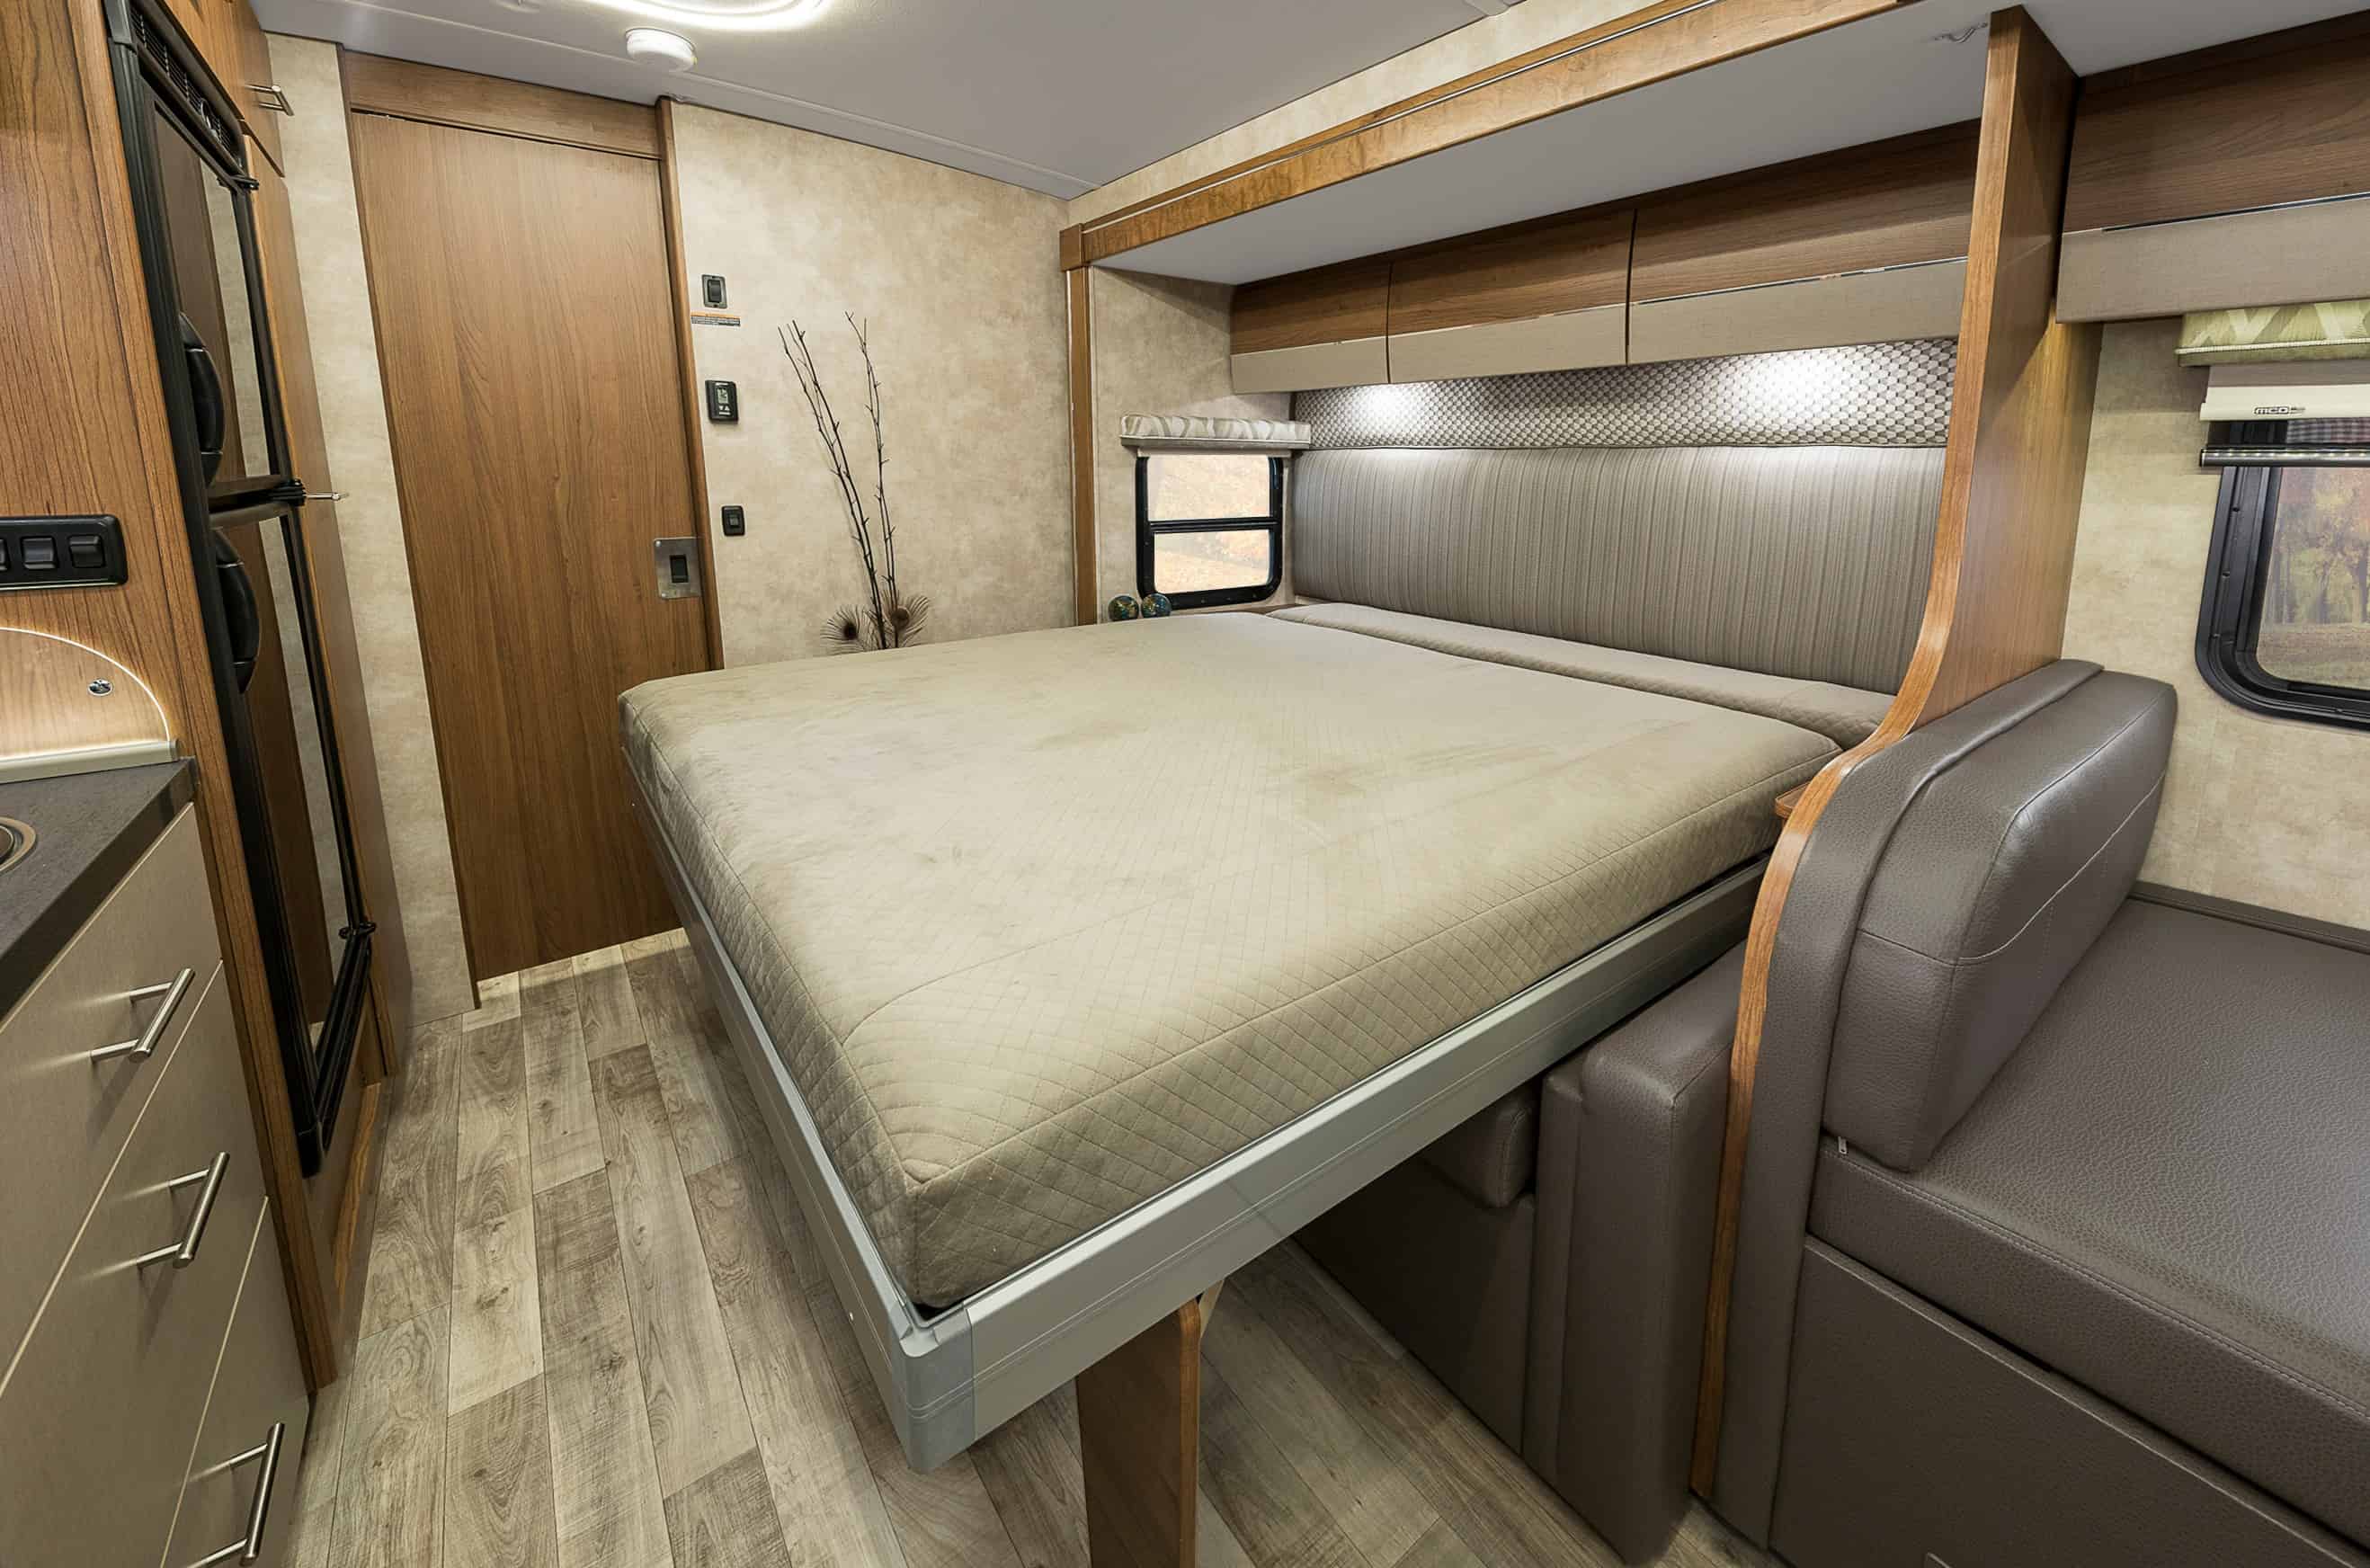 Travel Trailers With Murphy Beds, Travel Trailer With Queen Bed And Bunk Beds